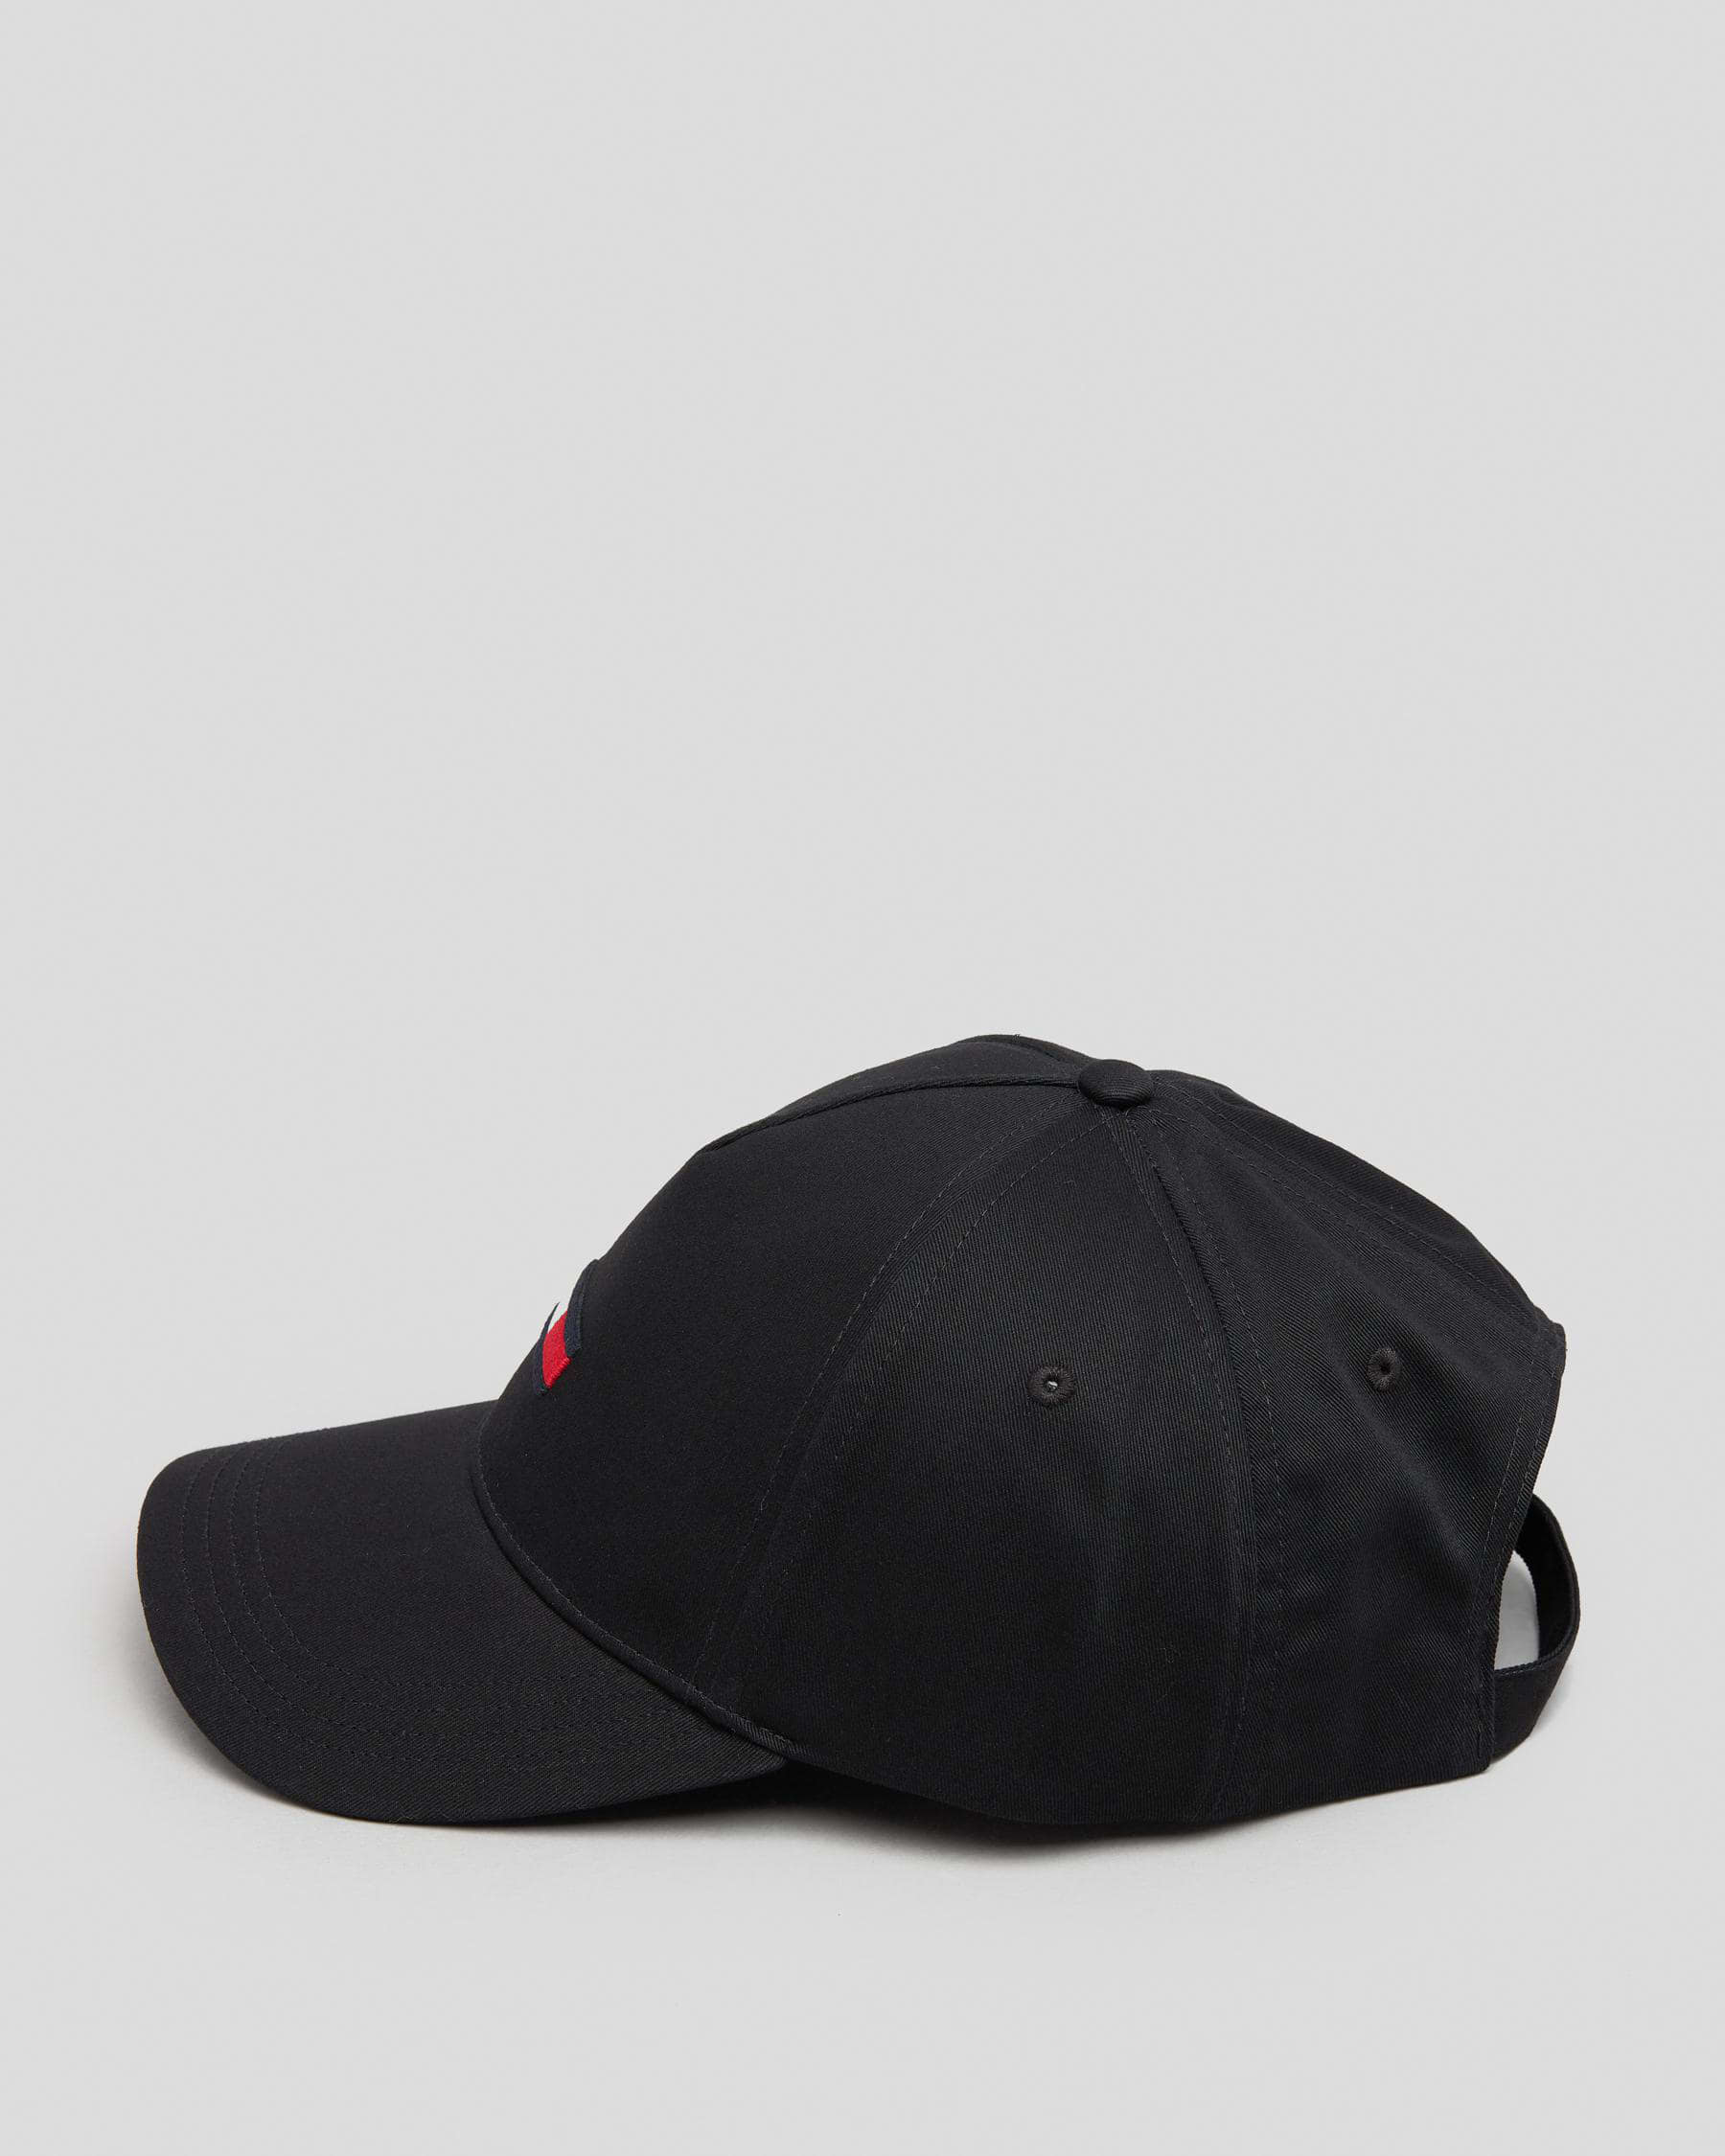 Tommy Hilfiger TJM Flag Cap In Black - FREE* Shipping & Easy Returns - City  Beach United States